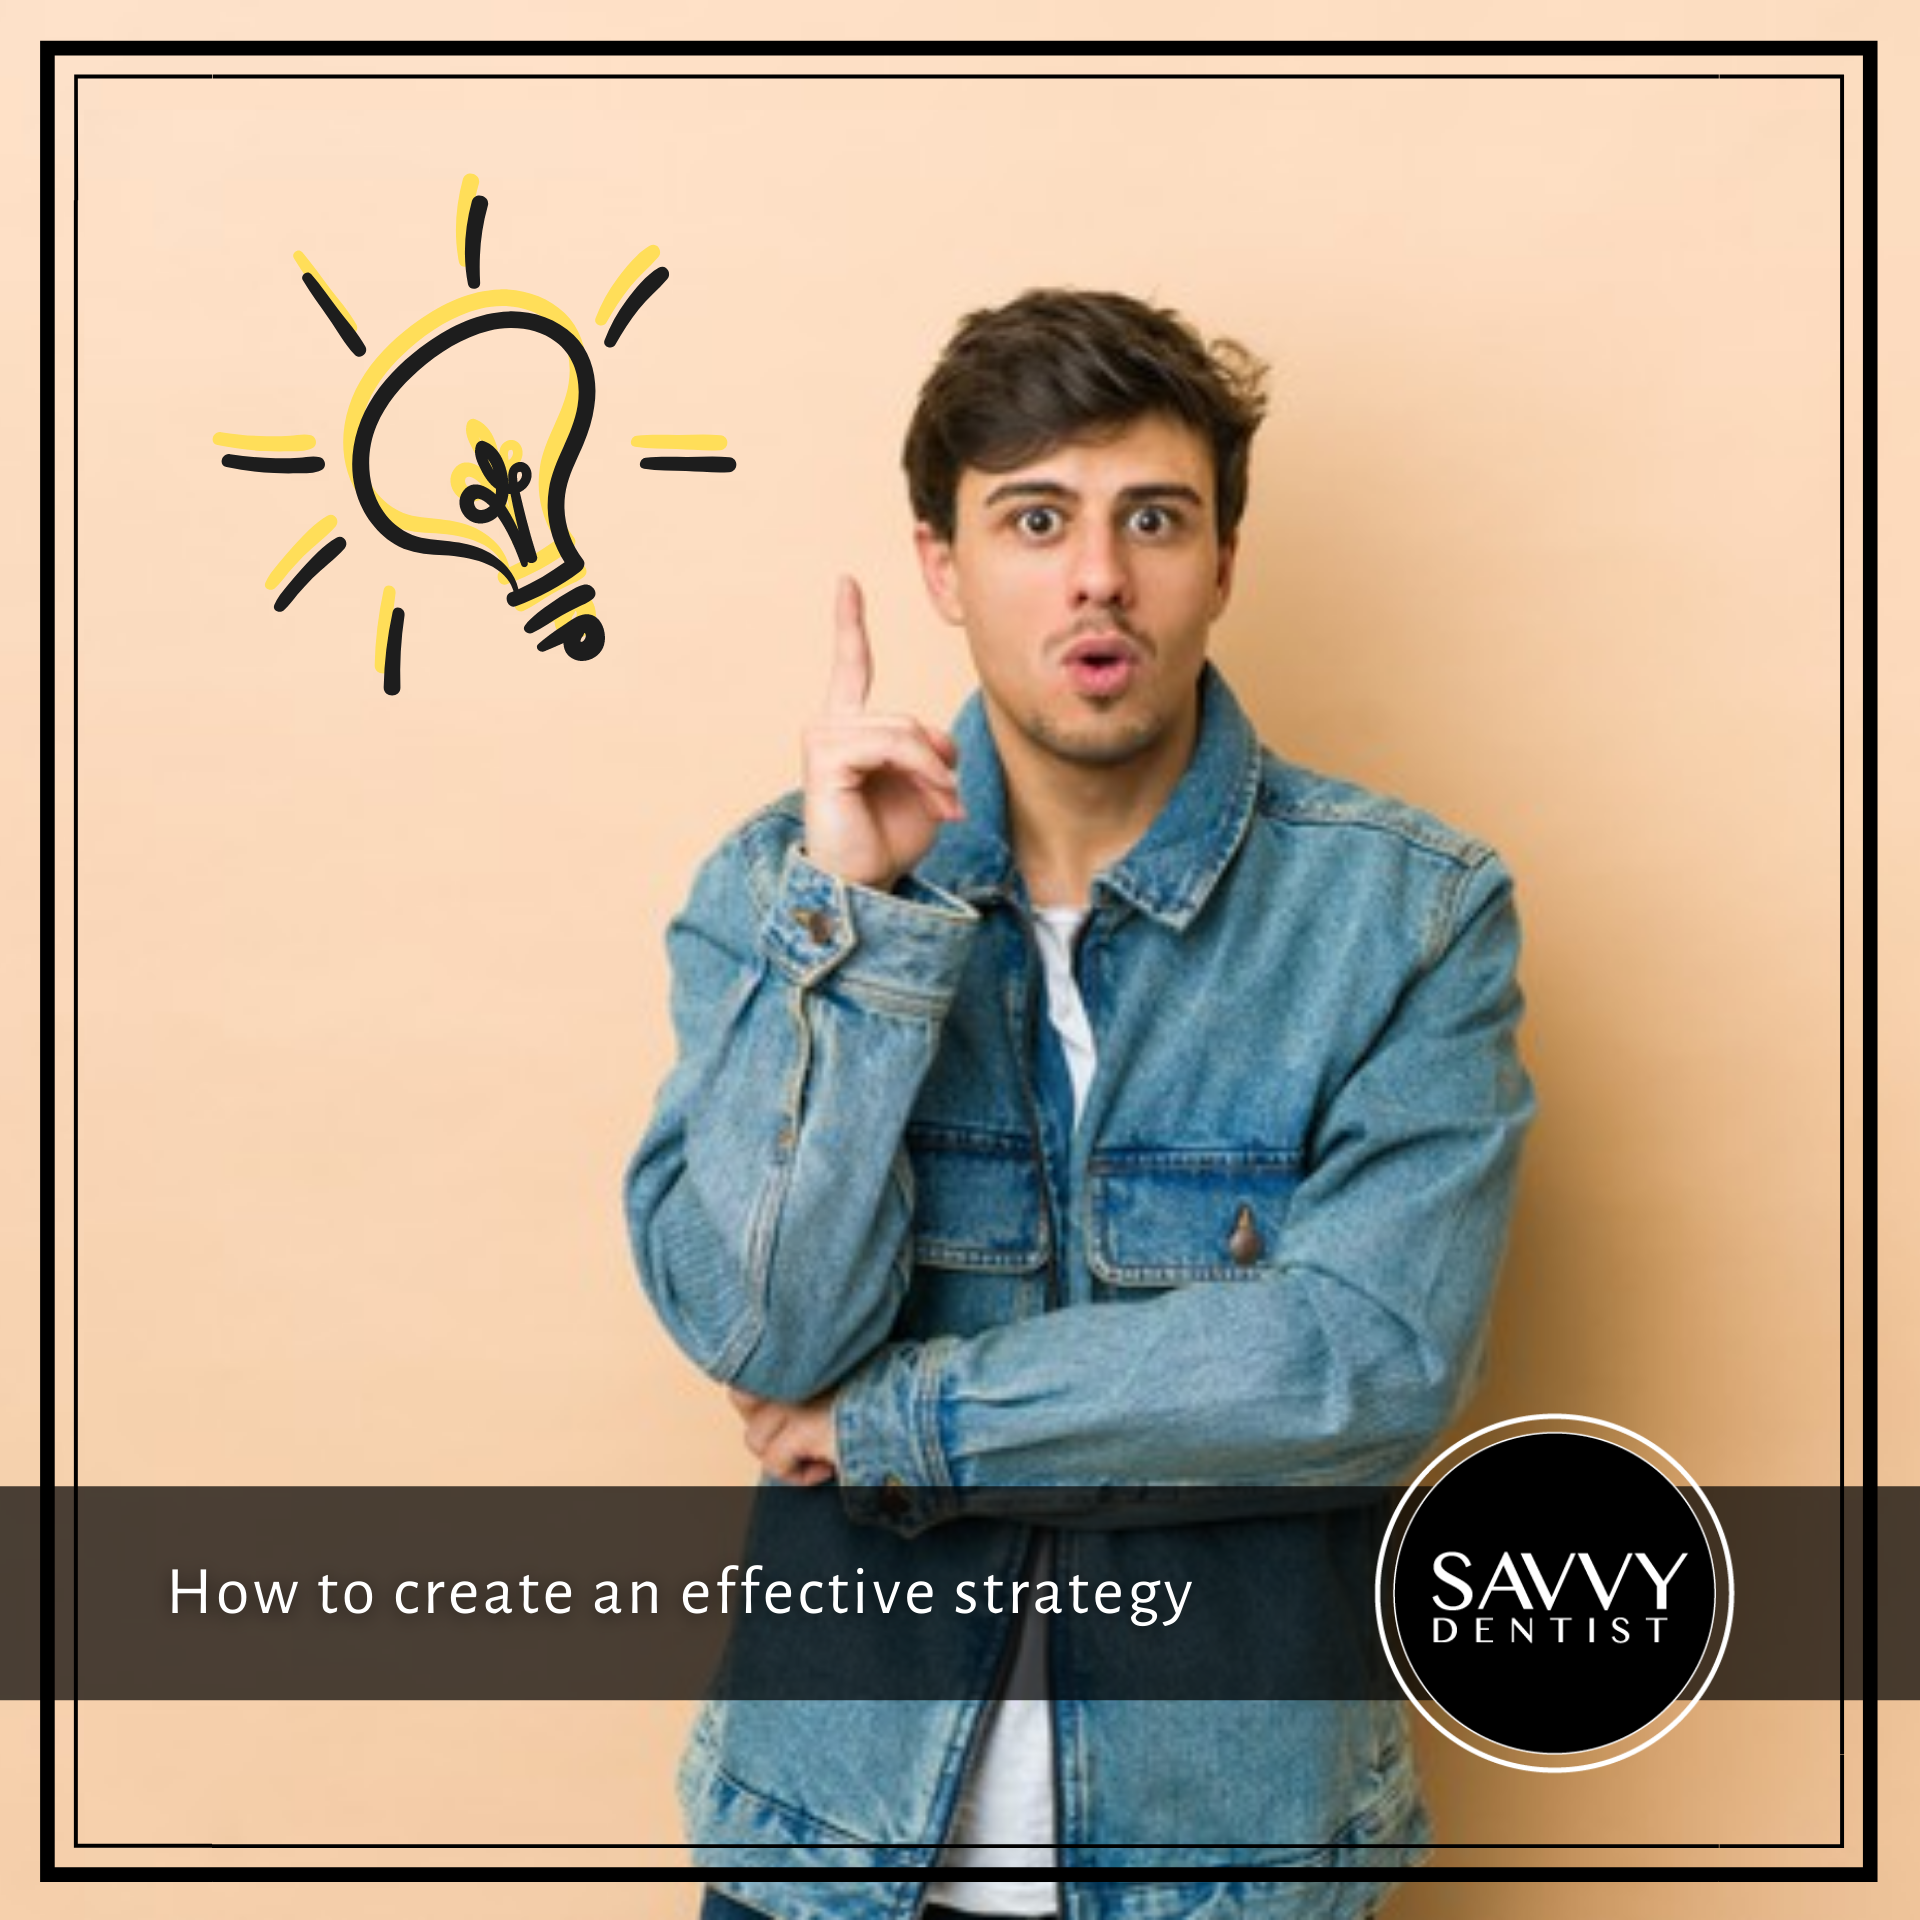 How to create an effective strategy